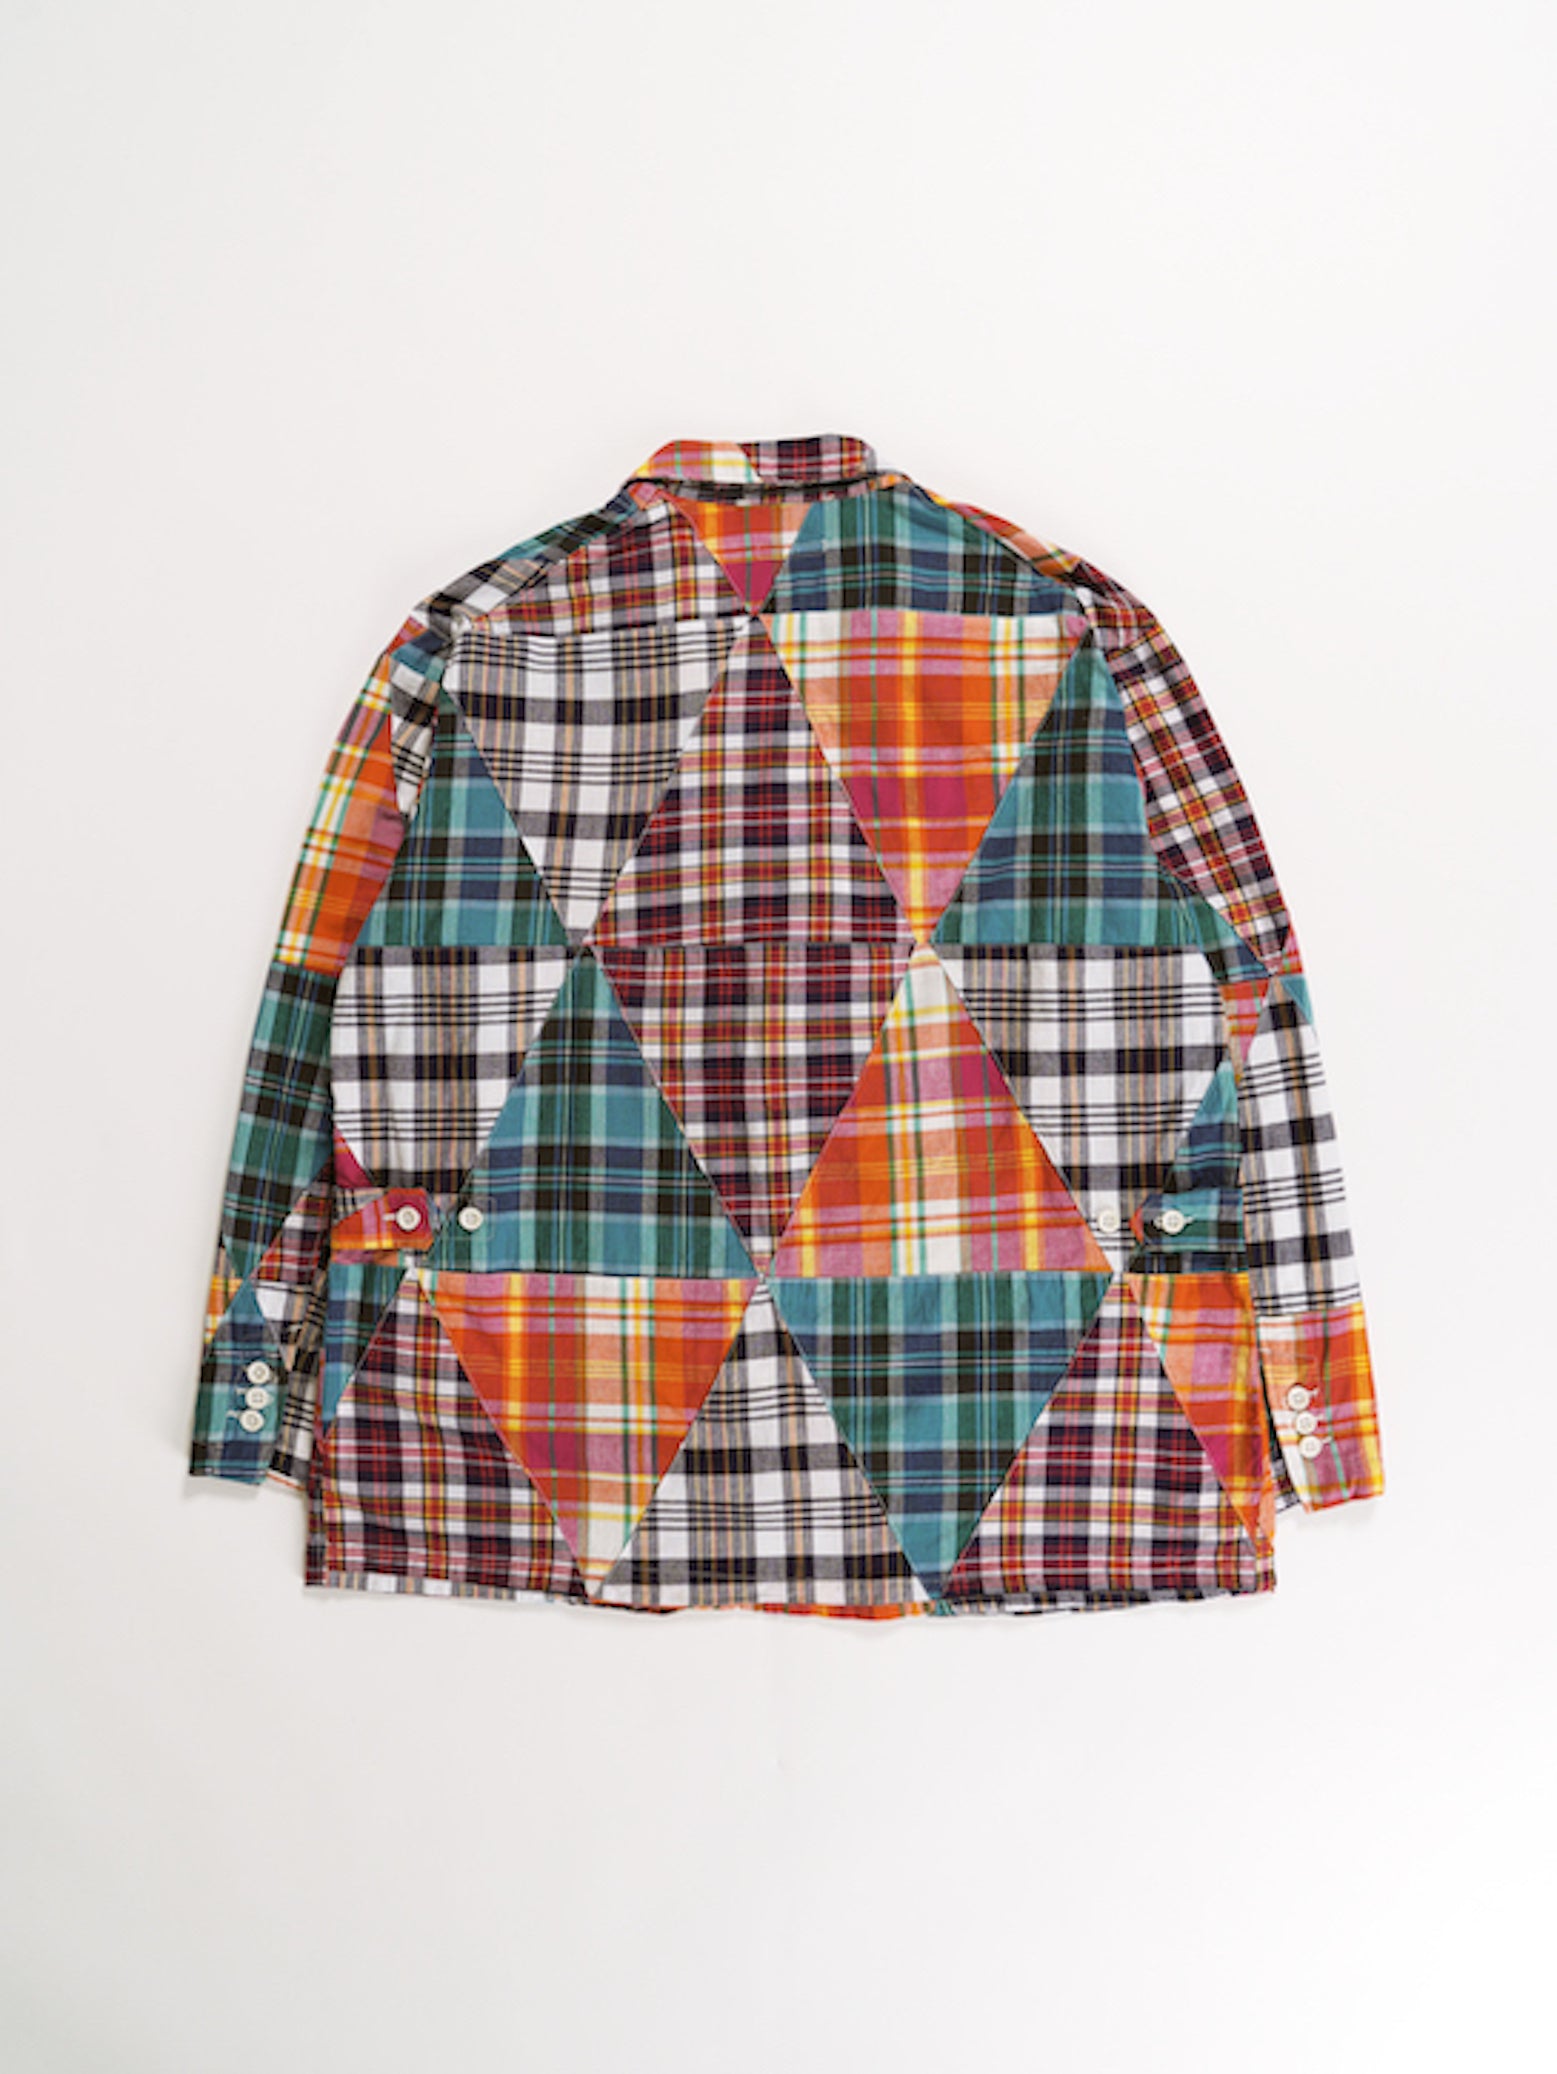 Loiter Jacket - Multi Color Triangle Patchwork Madras